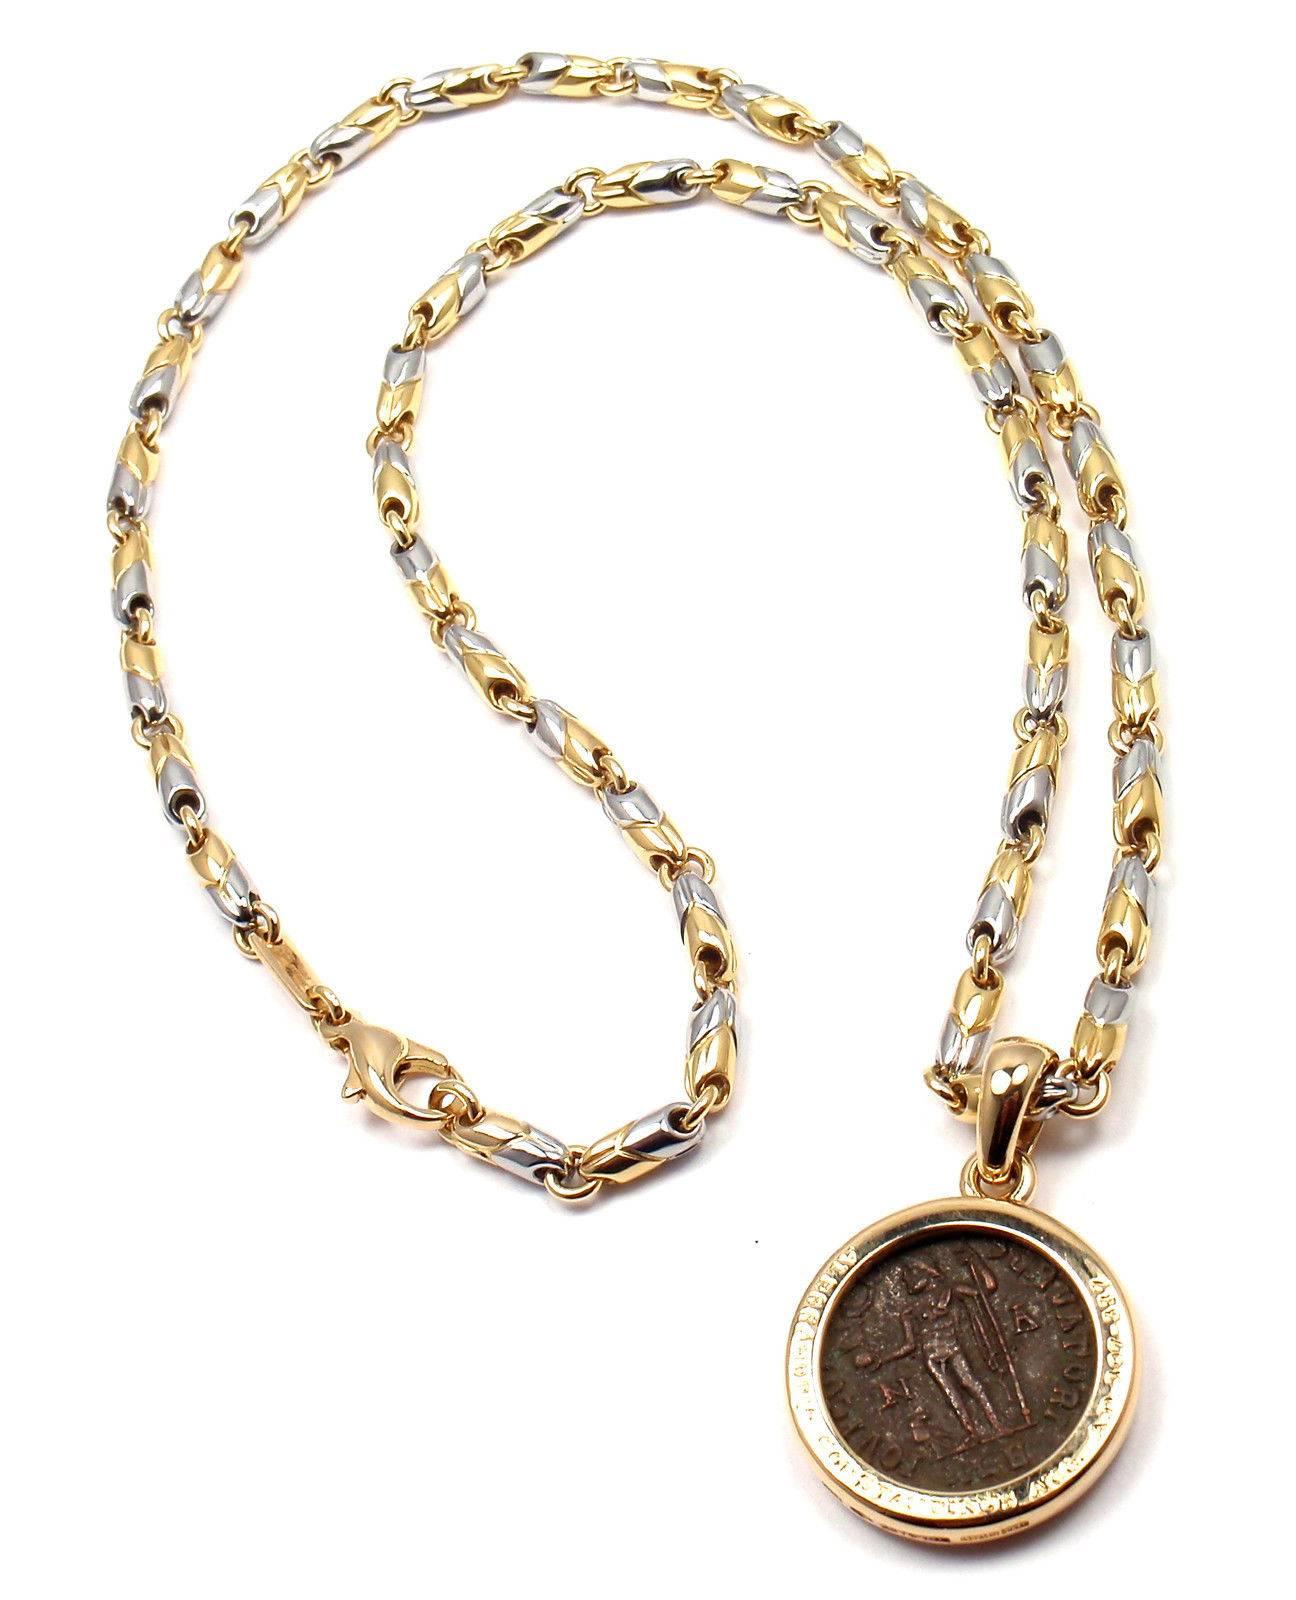 18k yellow gold and stainless steel ancient Roman coin, link chain necklace by Bulgari.
With 1 Ancient Coin Alessandria Constantinus AUG A.D. 307-337 23mm without the bail  

Details:
Length: 20